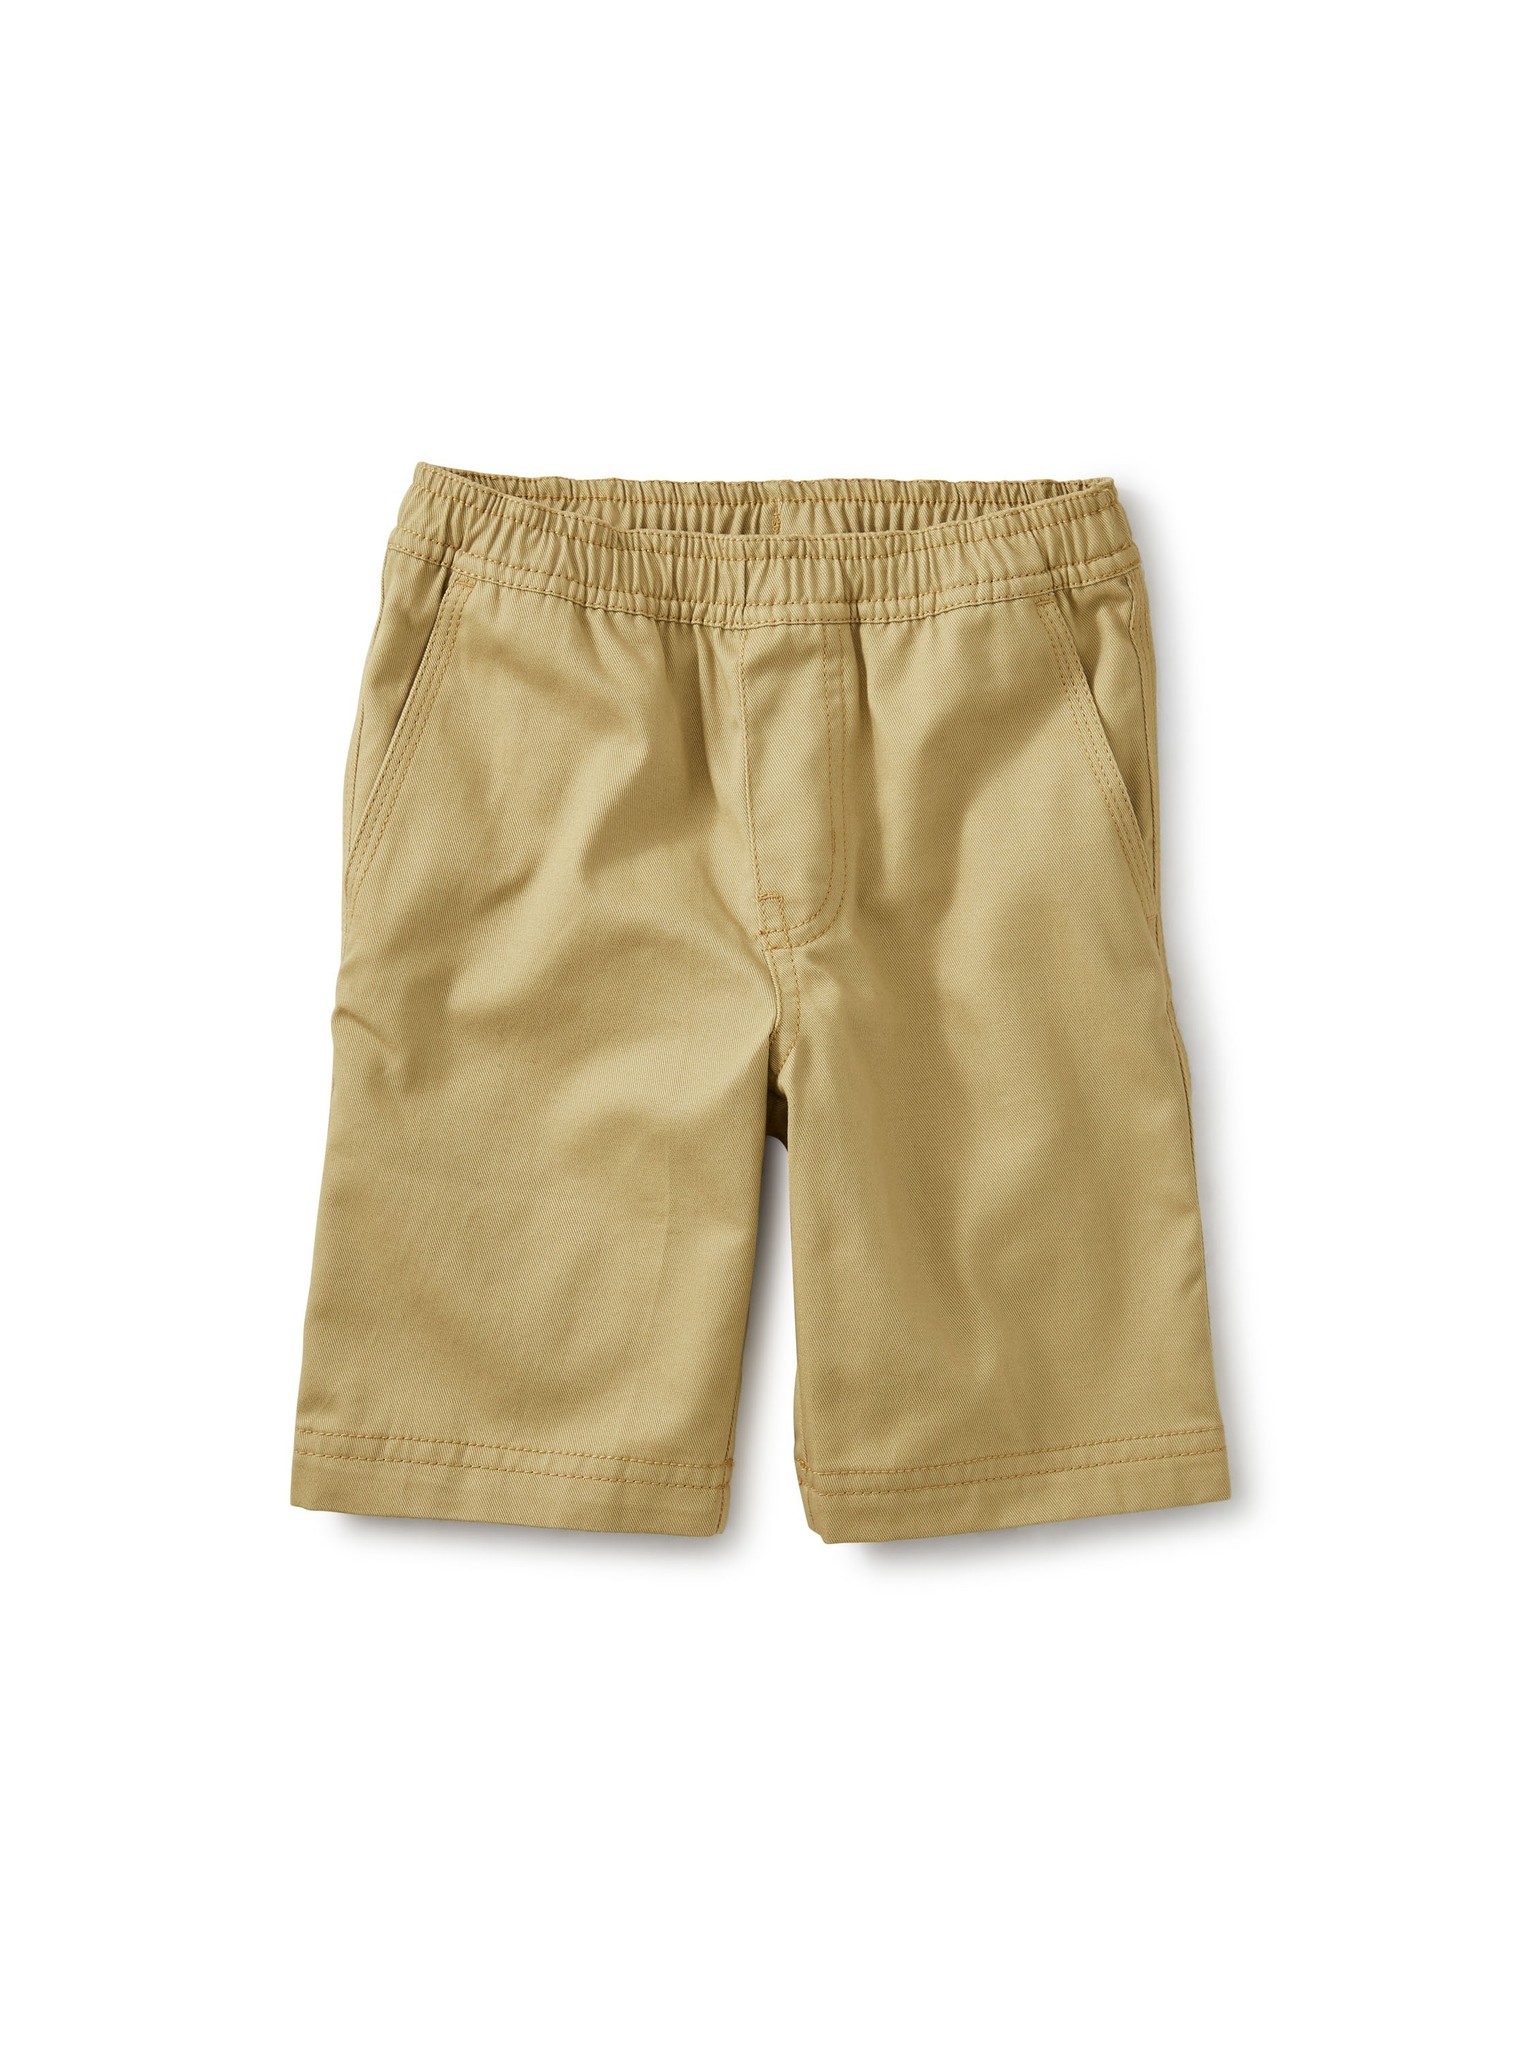 Tea Collection Easy Does It Twill Shorts - Sparrow